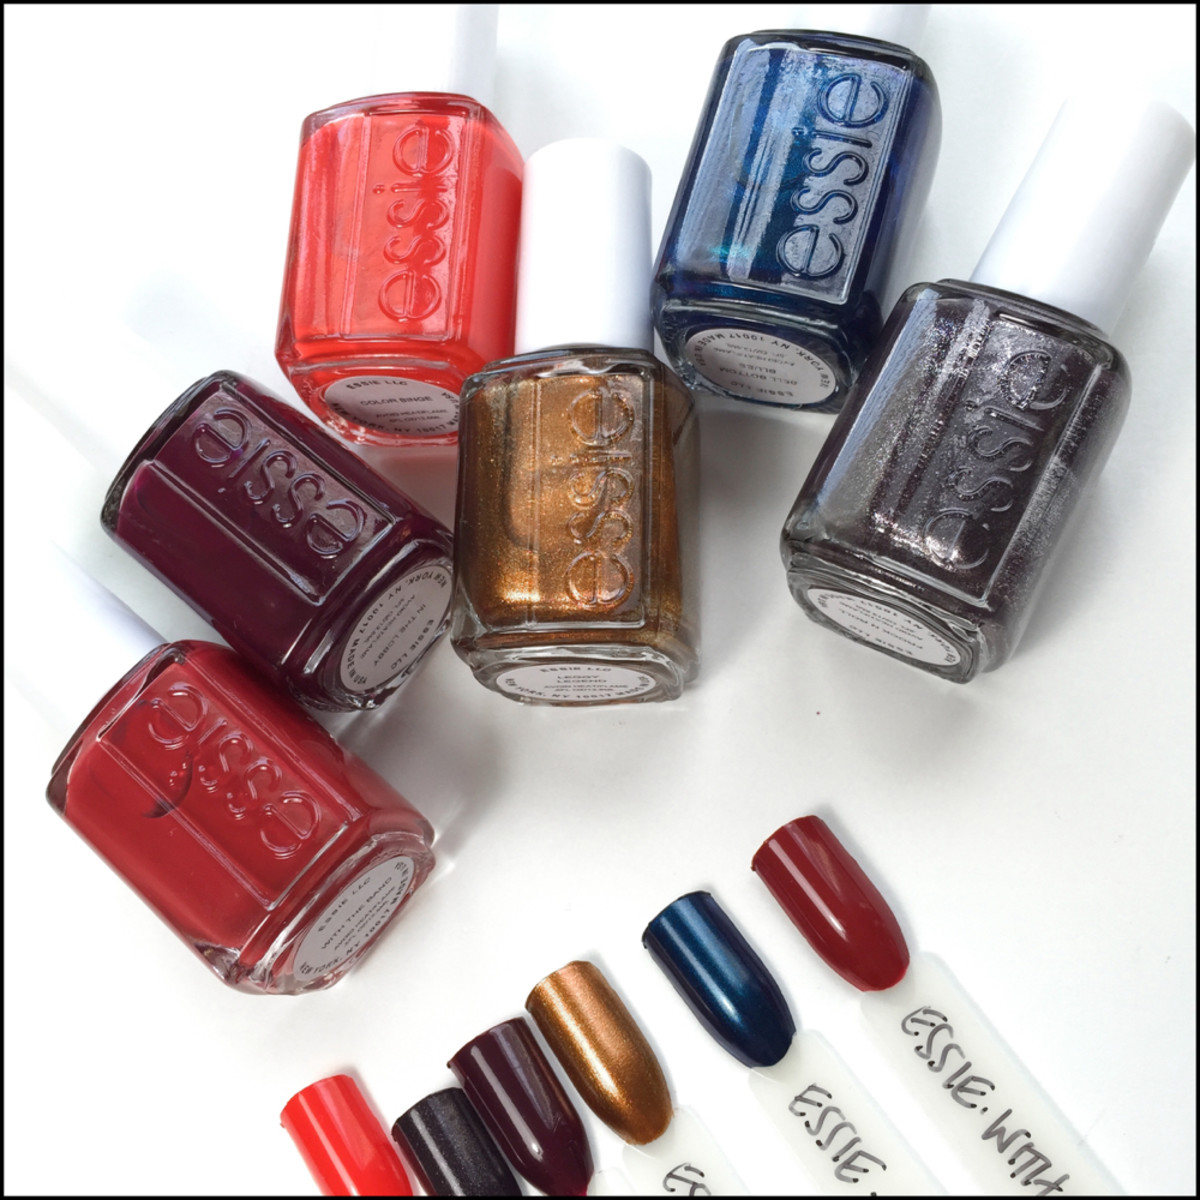 Essie Fall 2015 Beautygeeks Swatches and Review